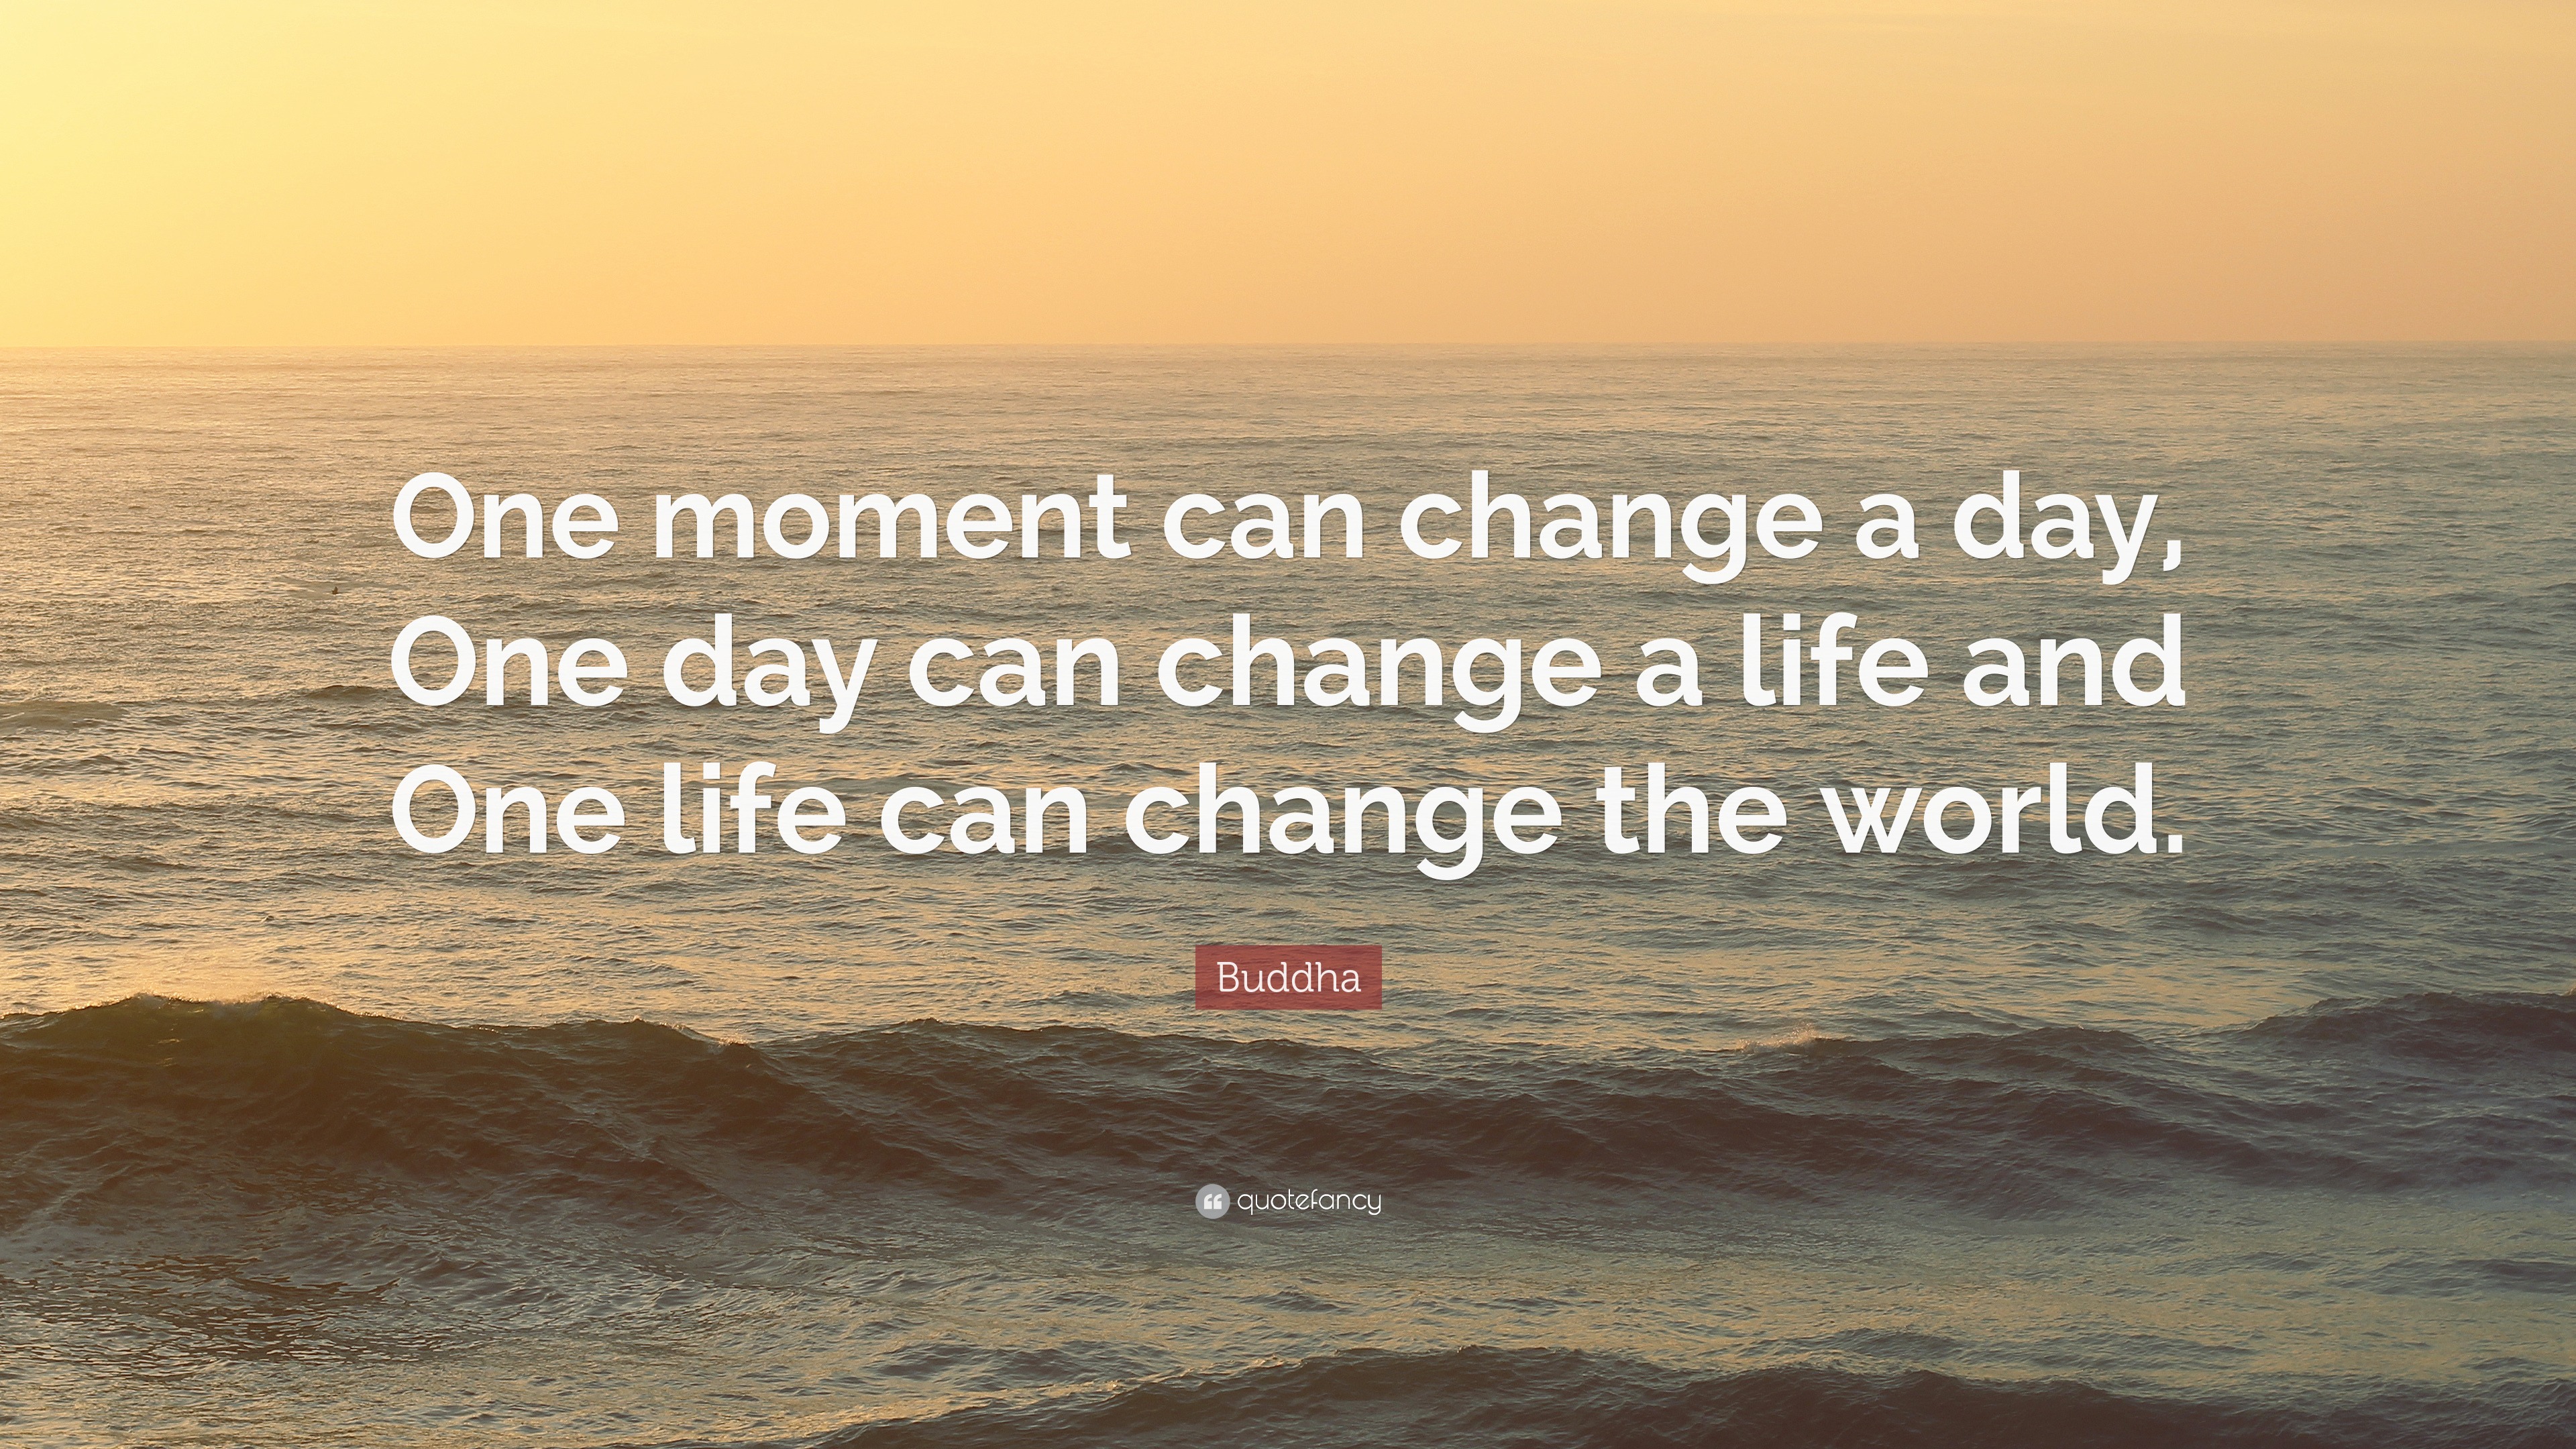 Buddha Quote: “One moment can change a day, One day can change a life